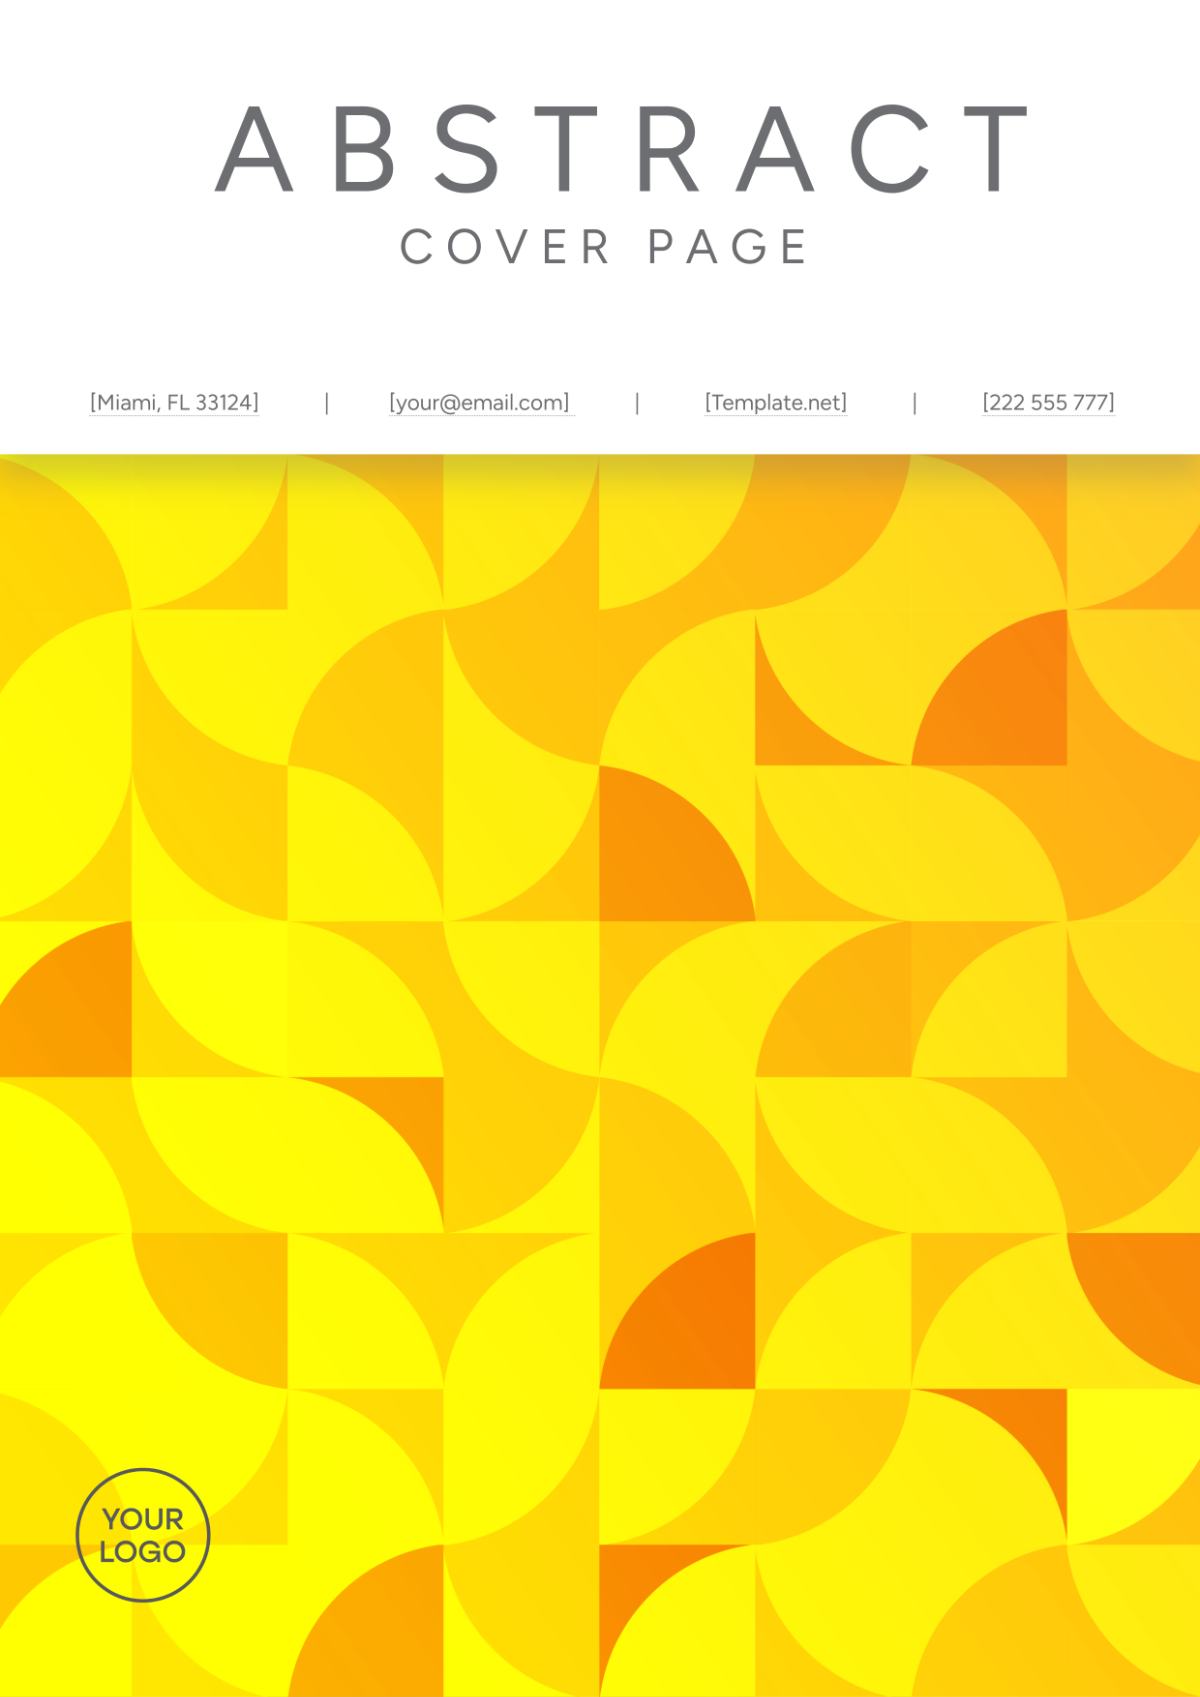 Abstract Cover Page Image Template